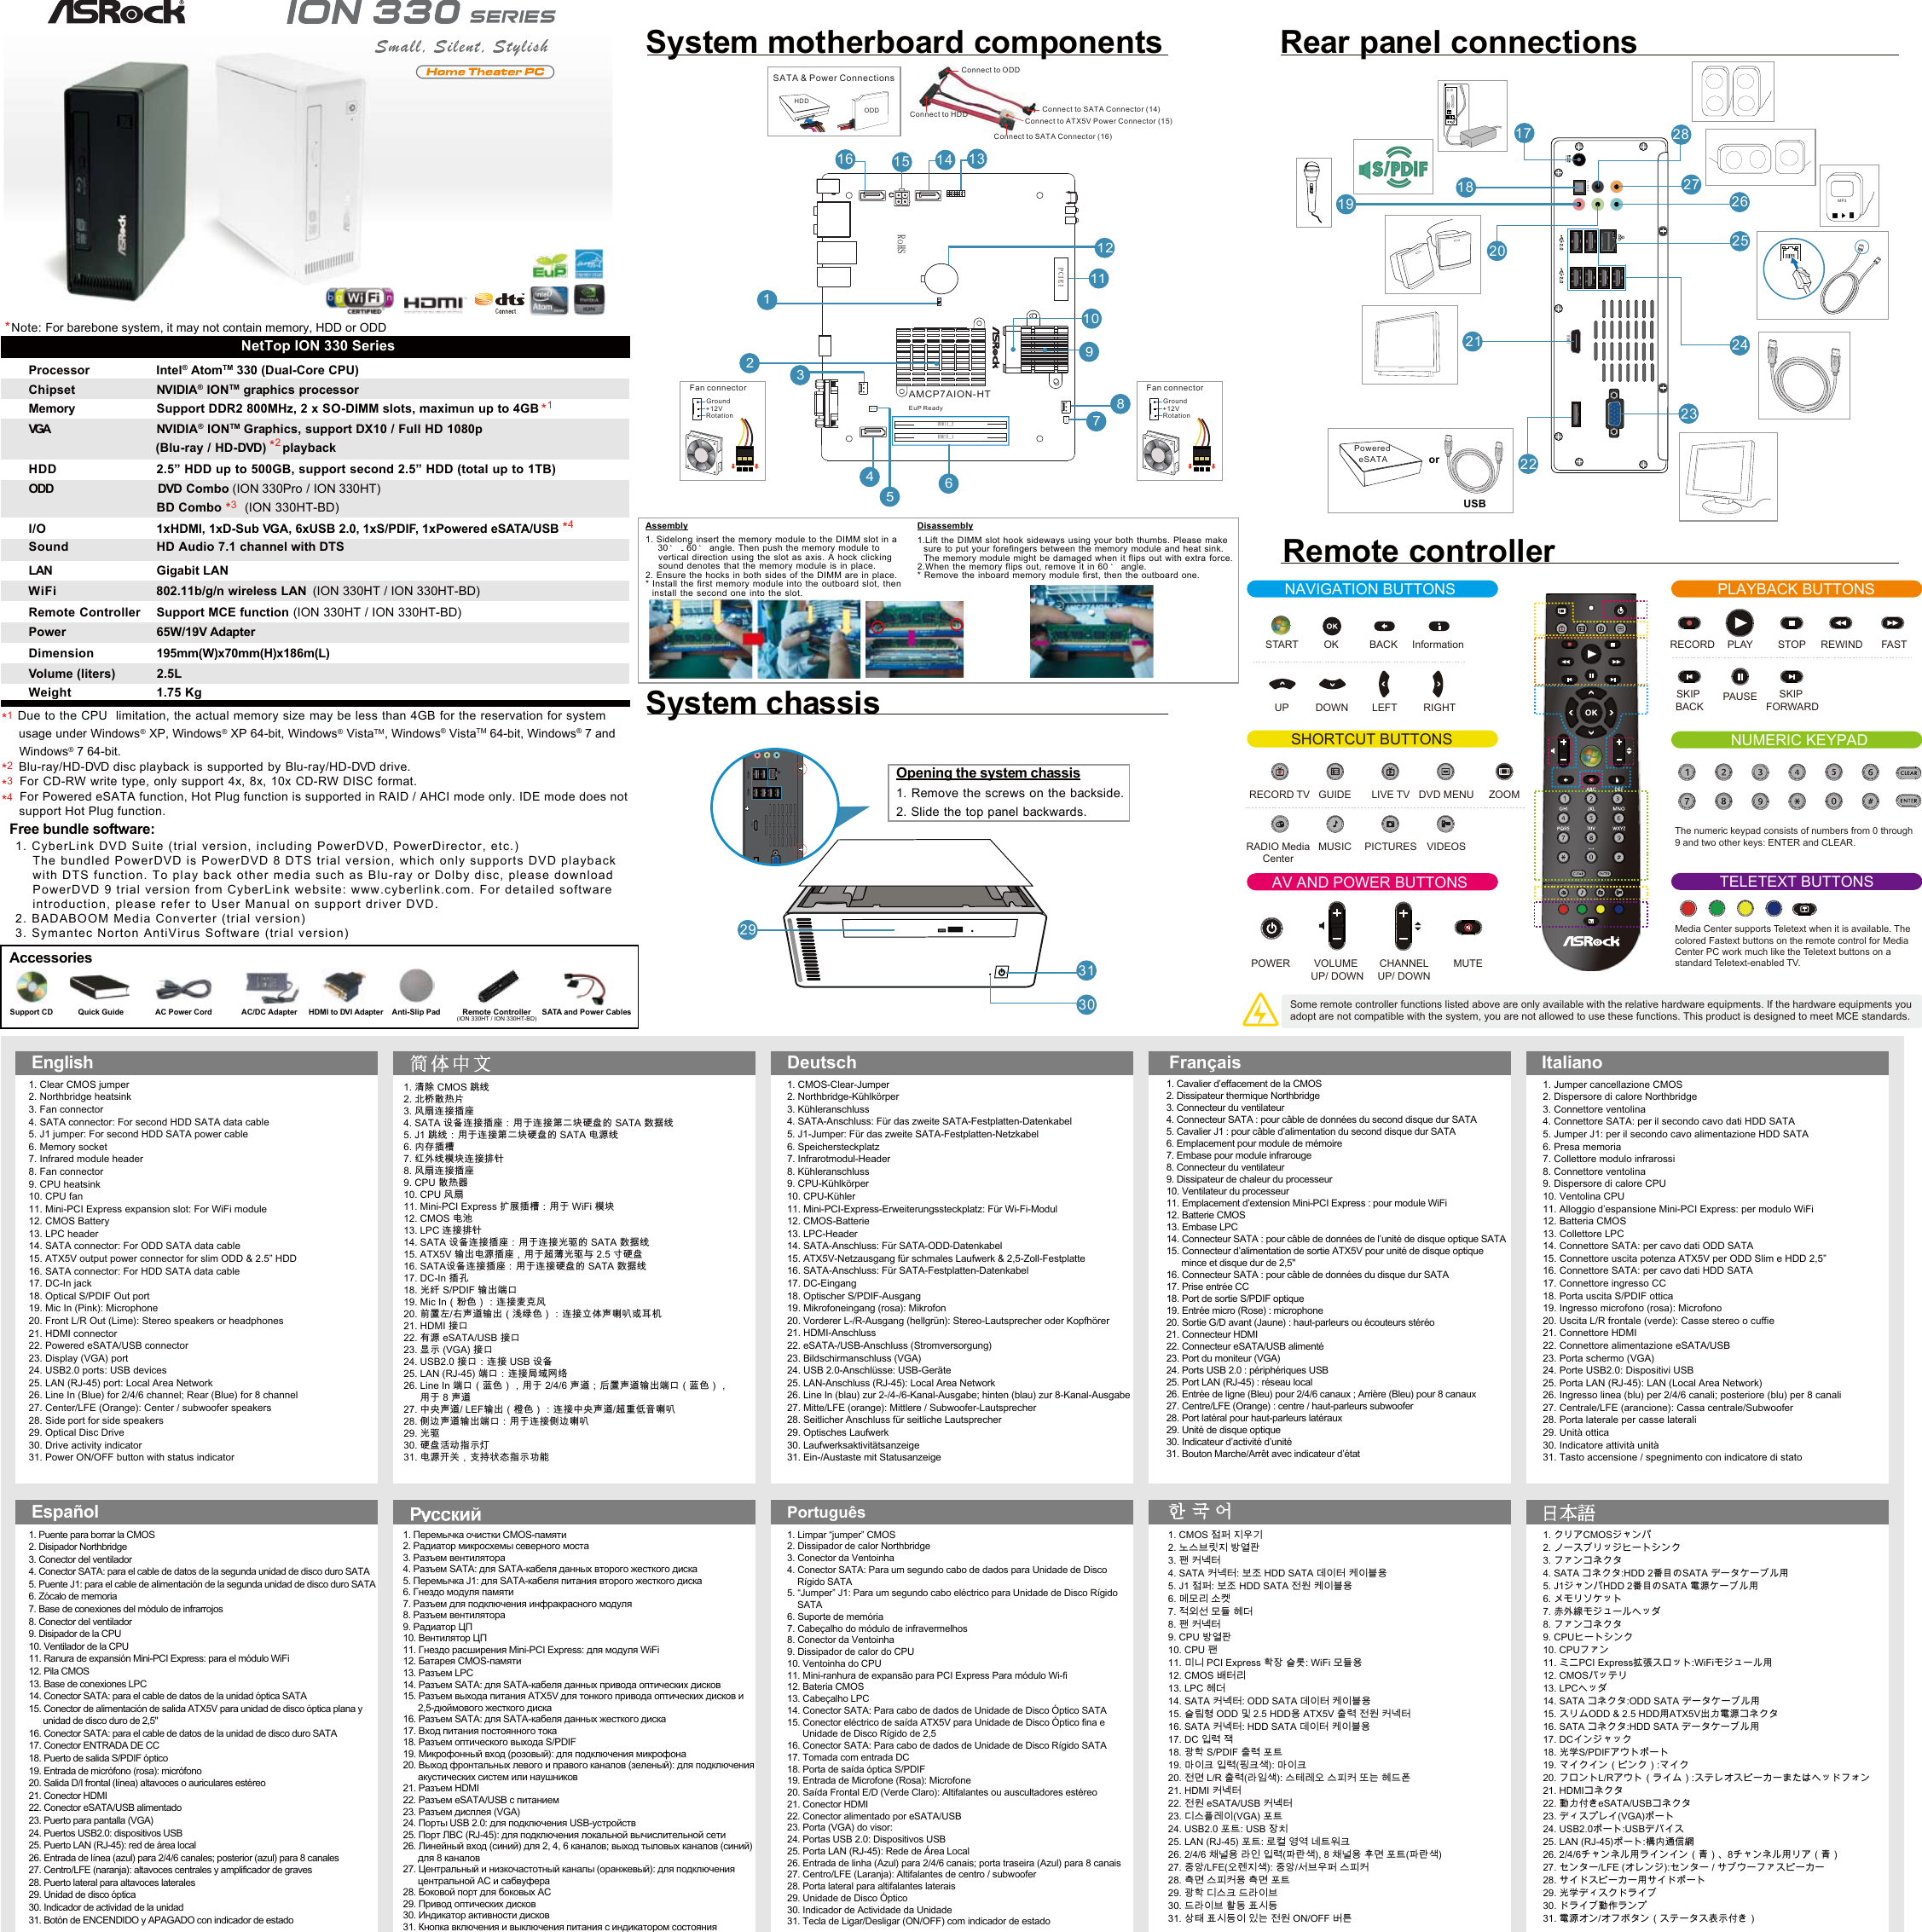 Page 1 of 2 - Asrock Asrock-Ion-330Ht-Bd-Quick-Start-Guide NetTop ION 330 Series Manual - New.p65